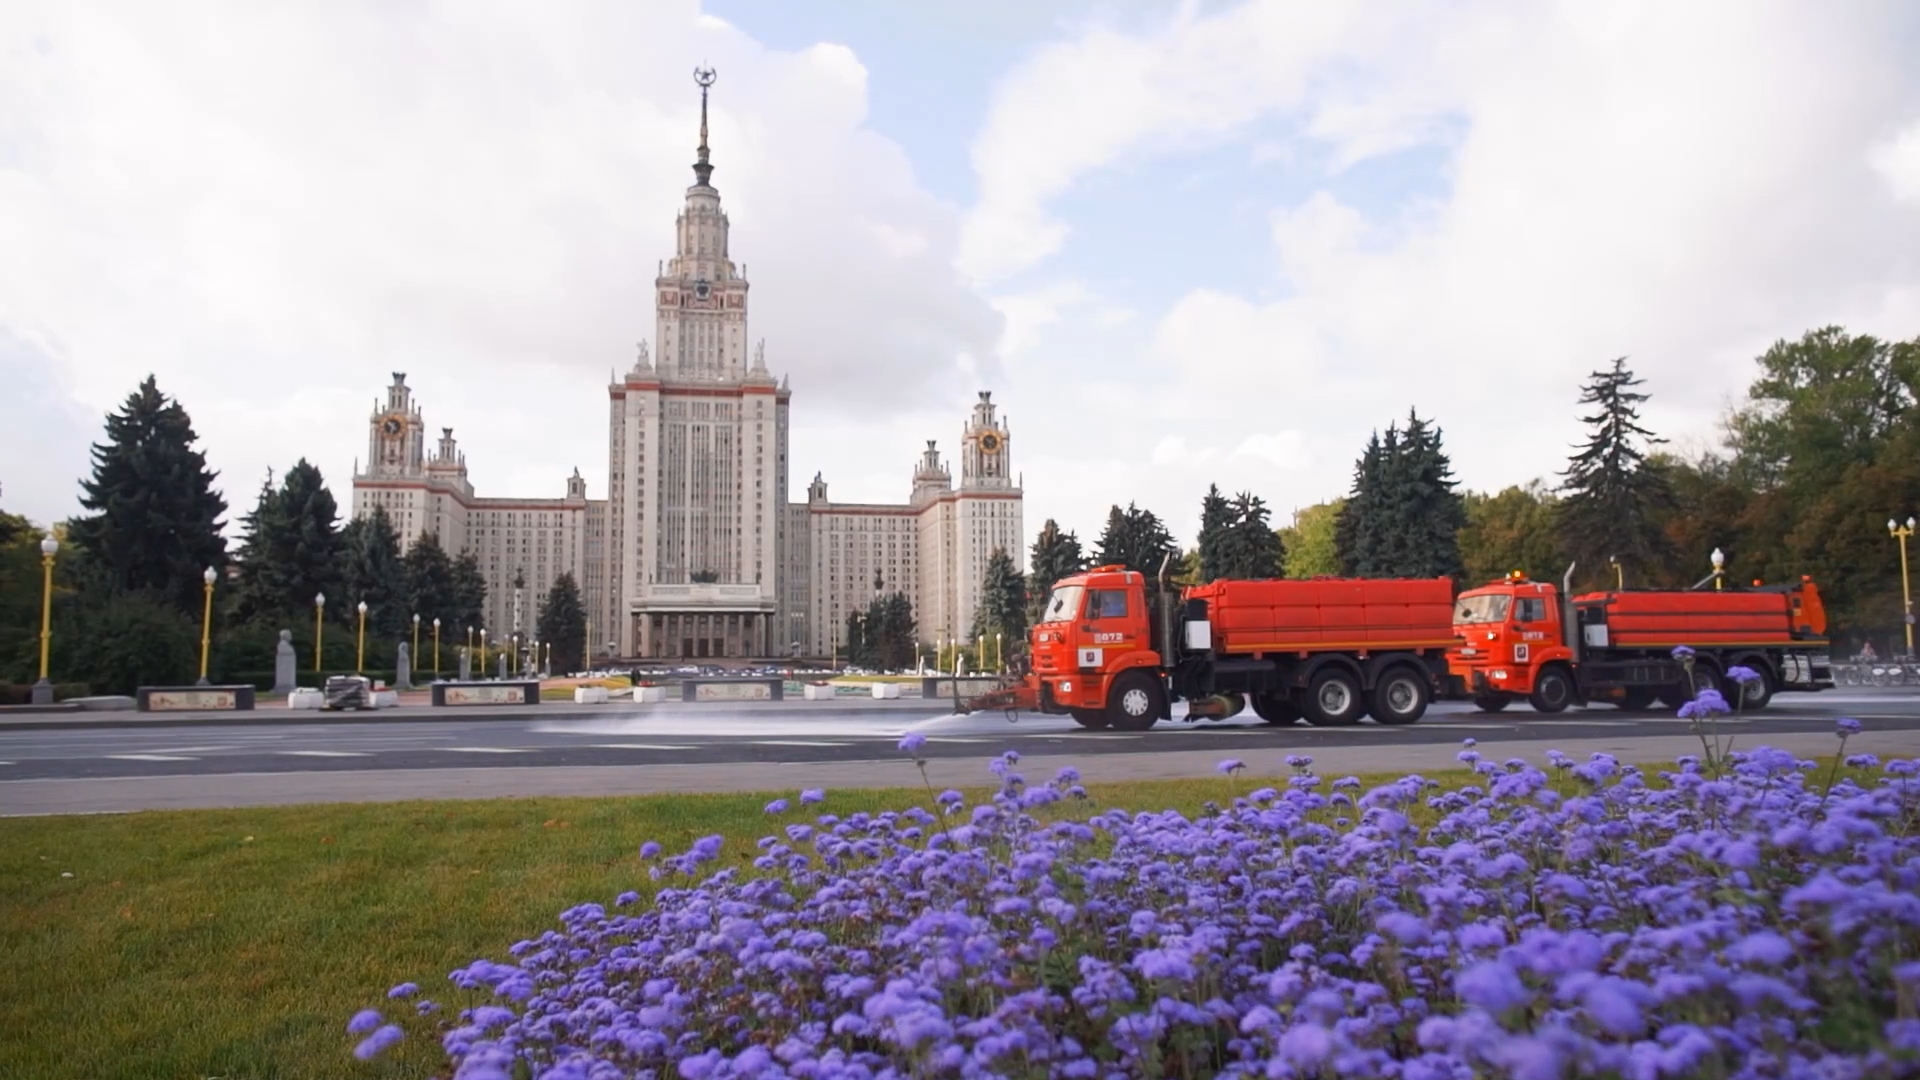 Merkator Holding is the largest producer of road and municipal vehicles in Russia